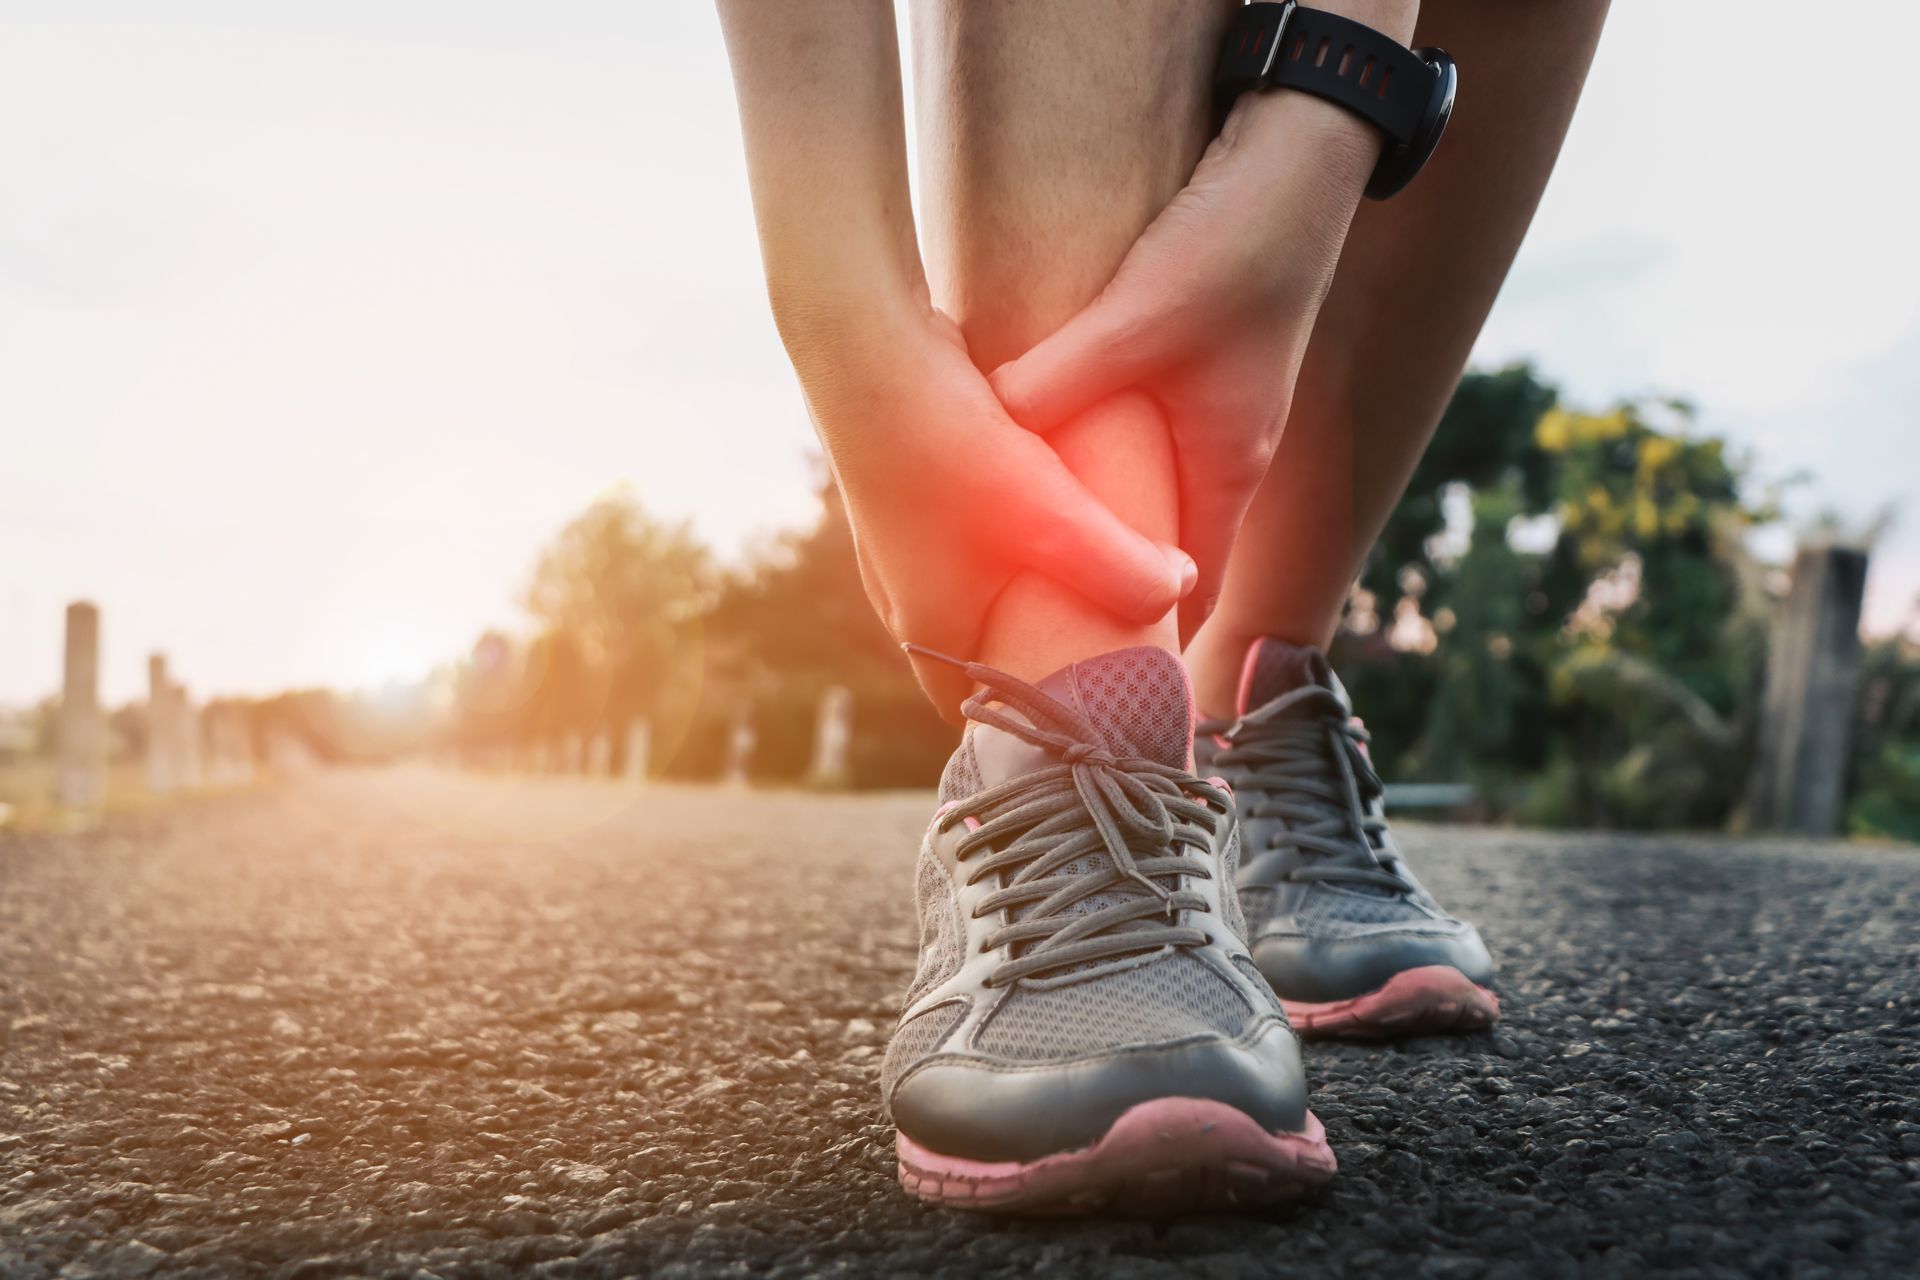 A person is holding their ankle in pain while running on a road